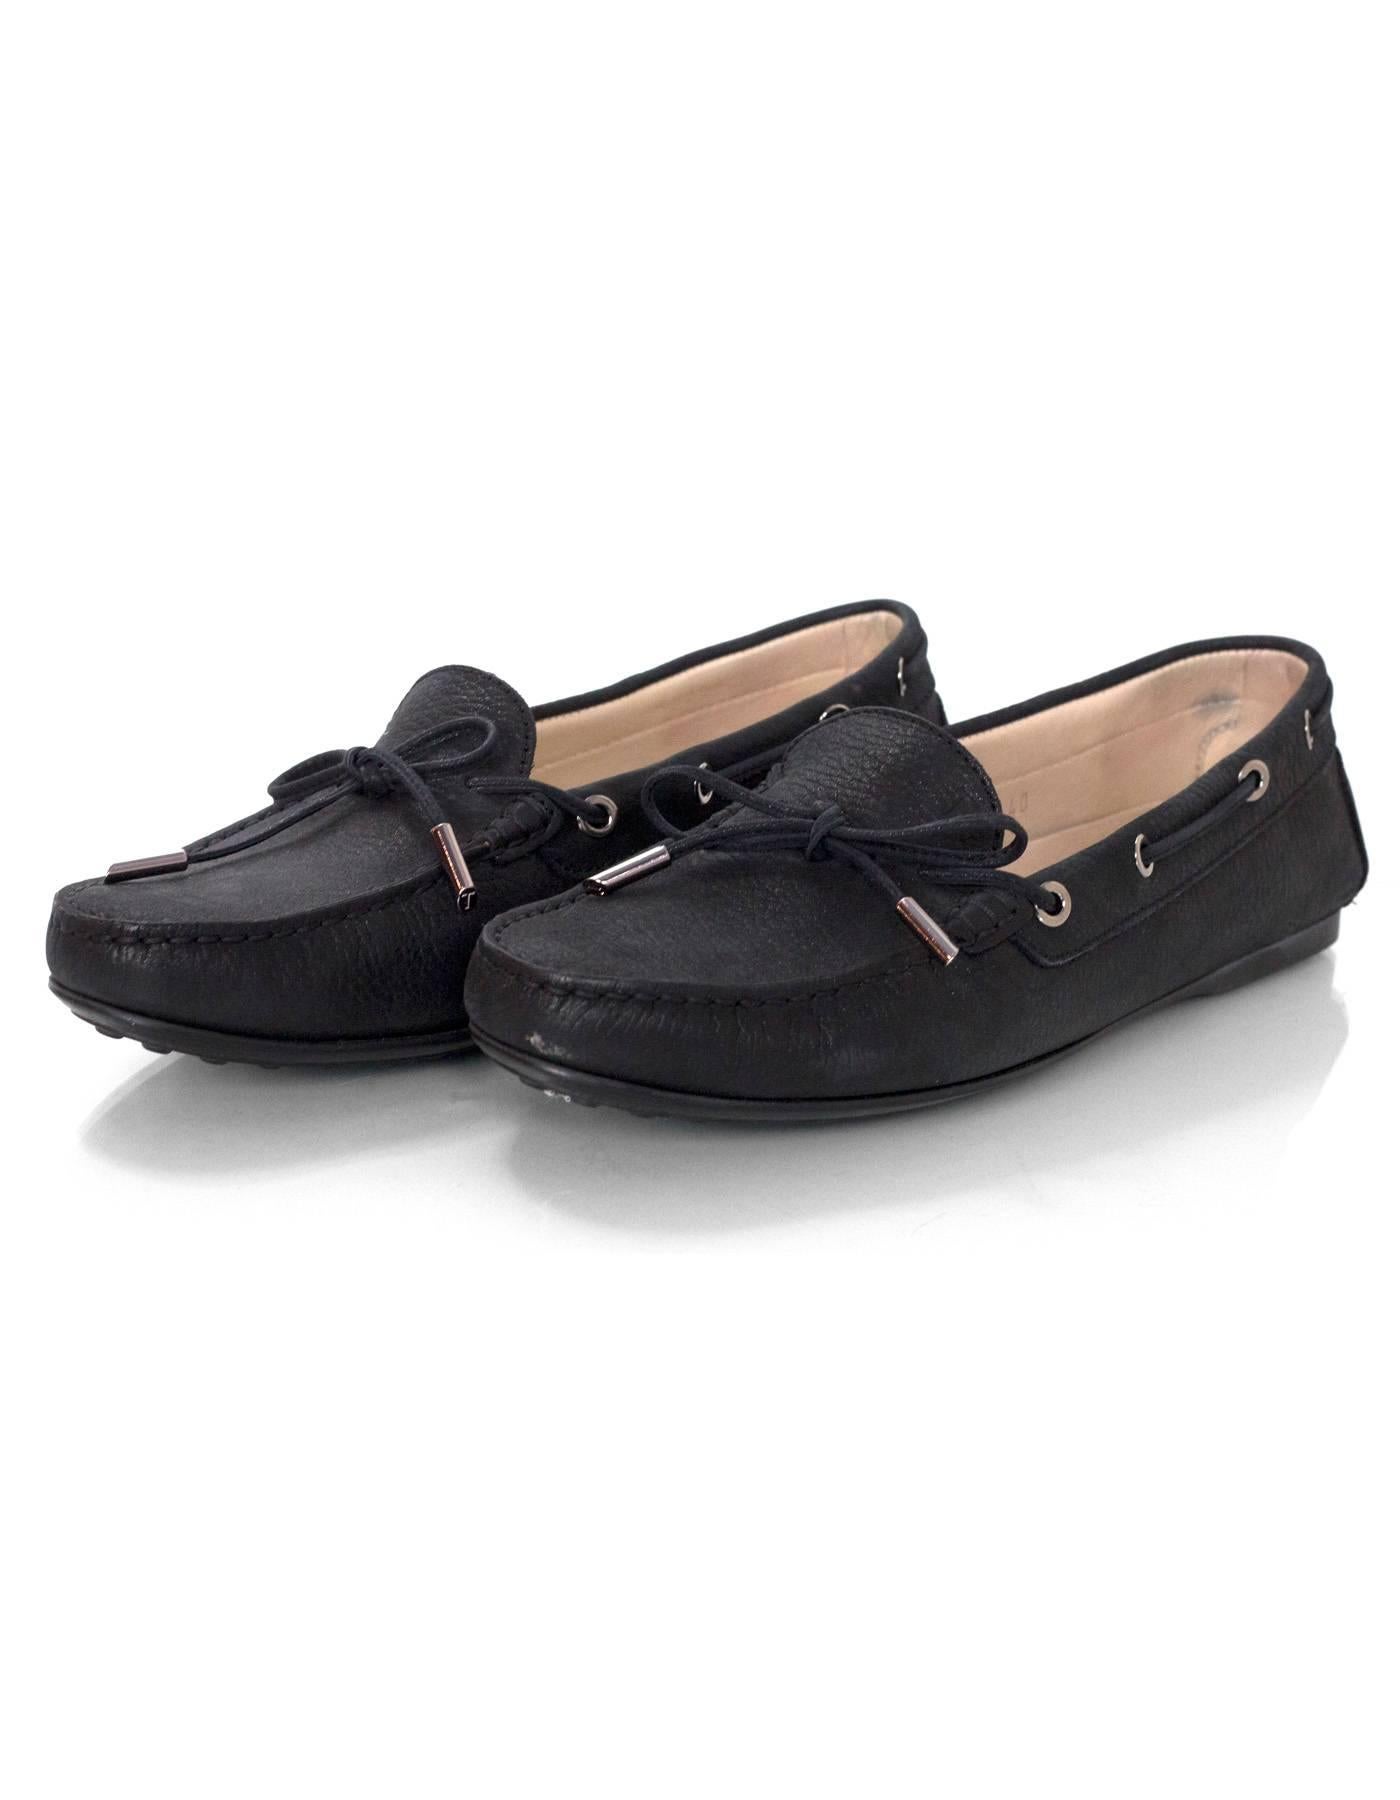 TOD's Black Iridescent Calfskin Driving Loafers Sz 40

Made In: Italy
Color: Black
Materials: Leather
Closure/Opening: Slide on
Sole Stamp: TODS
Overall Condition: Excellent pre-owned condition with the exception of very light wear at